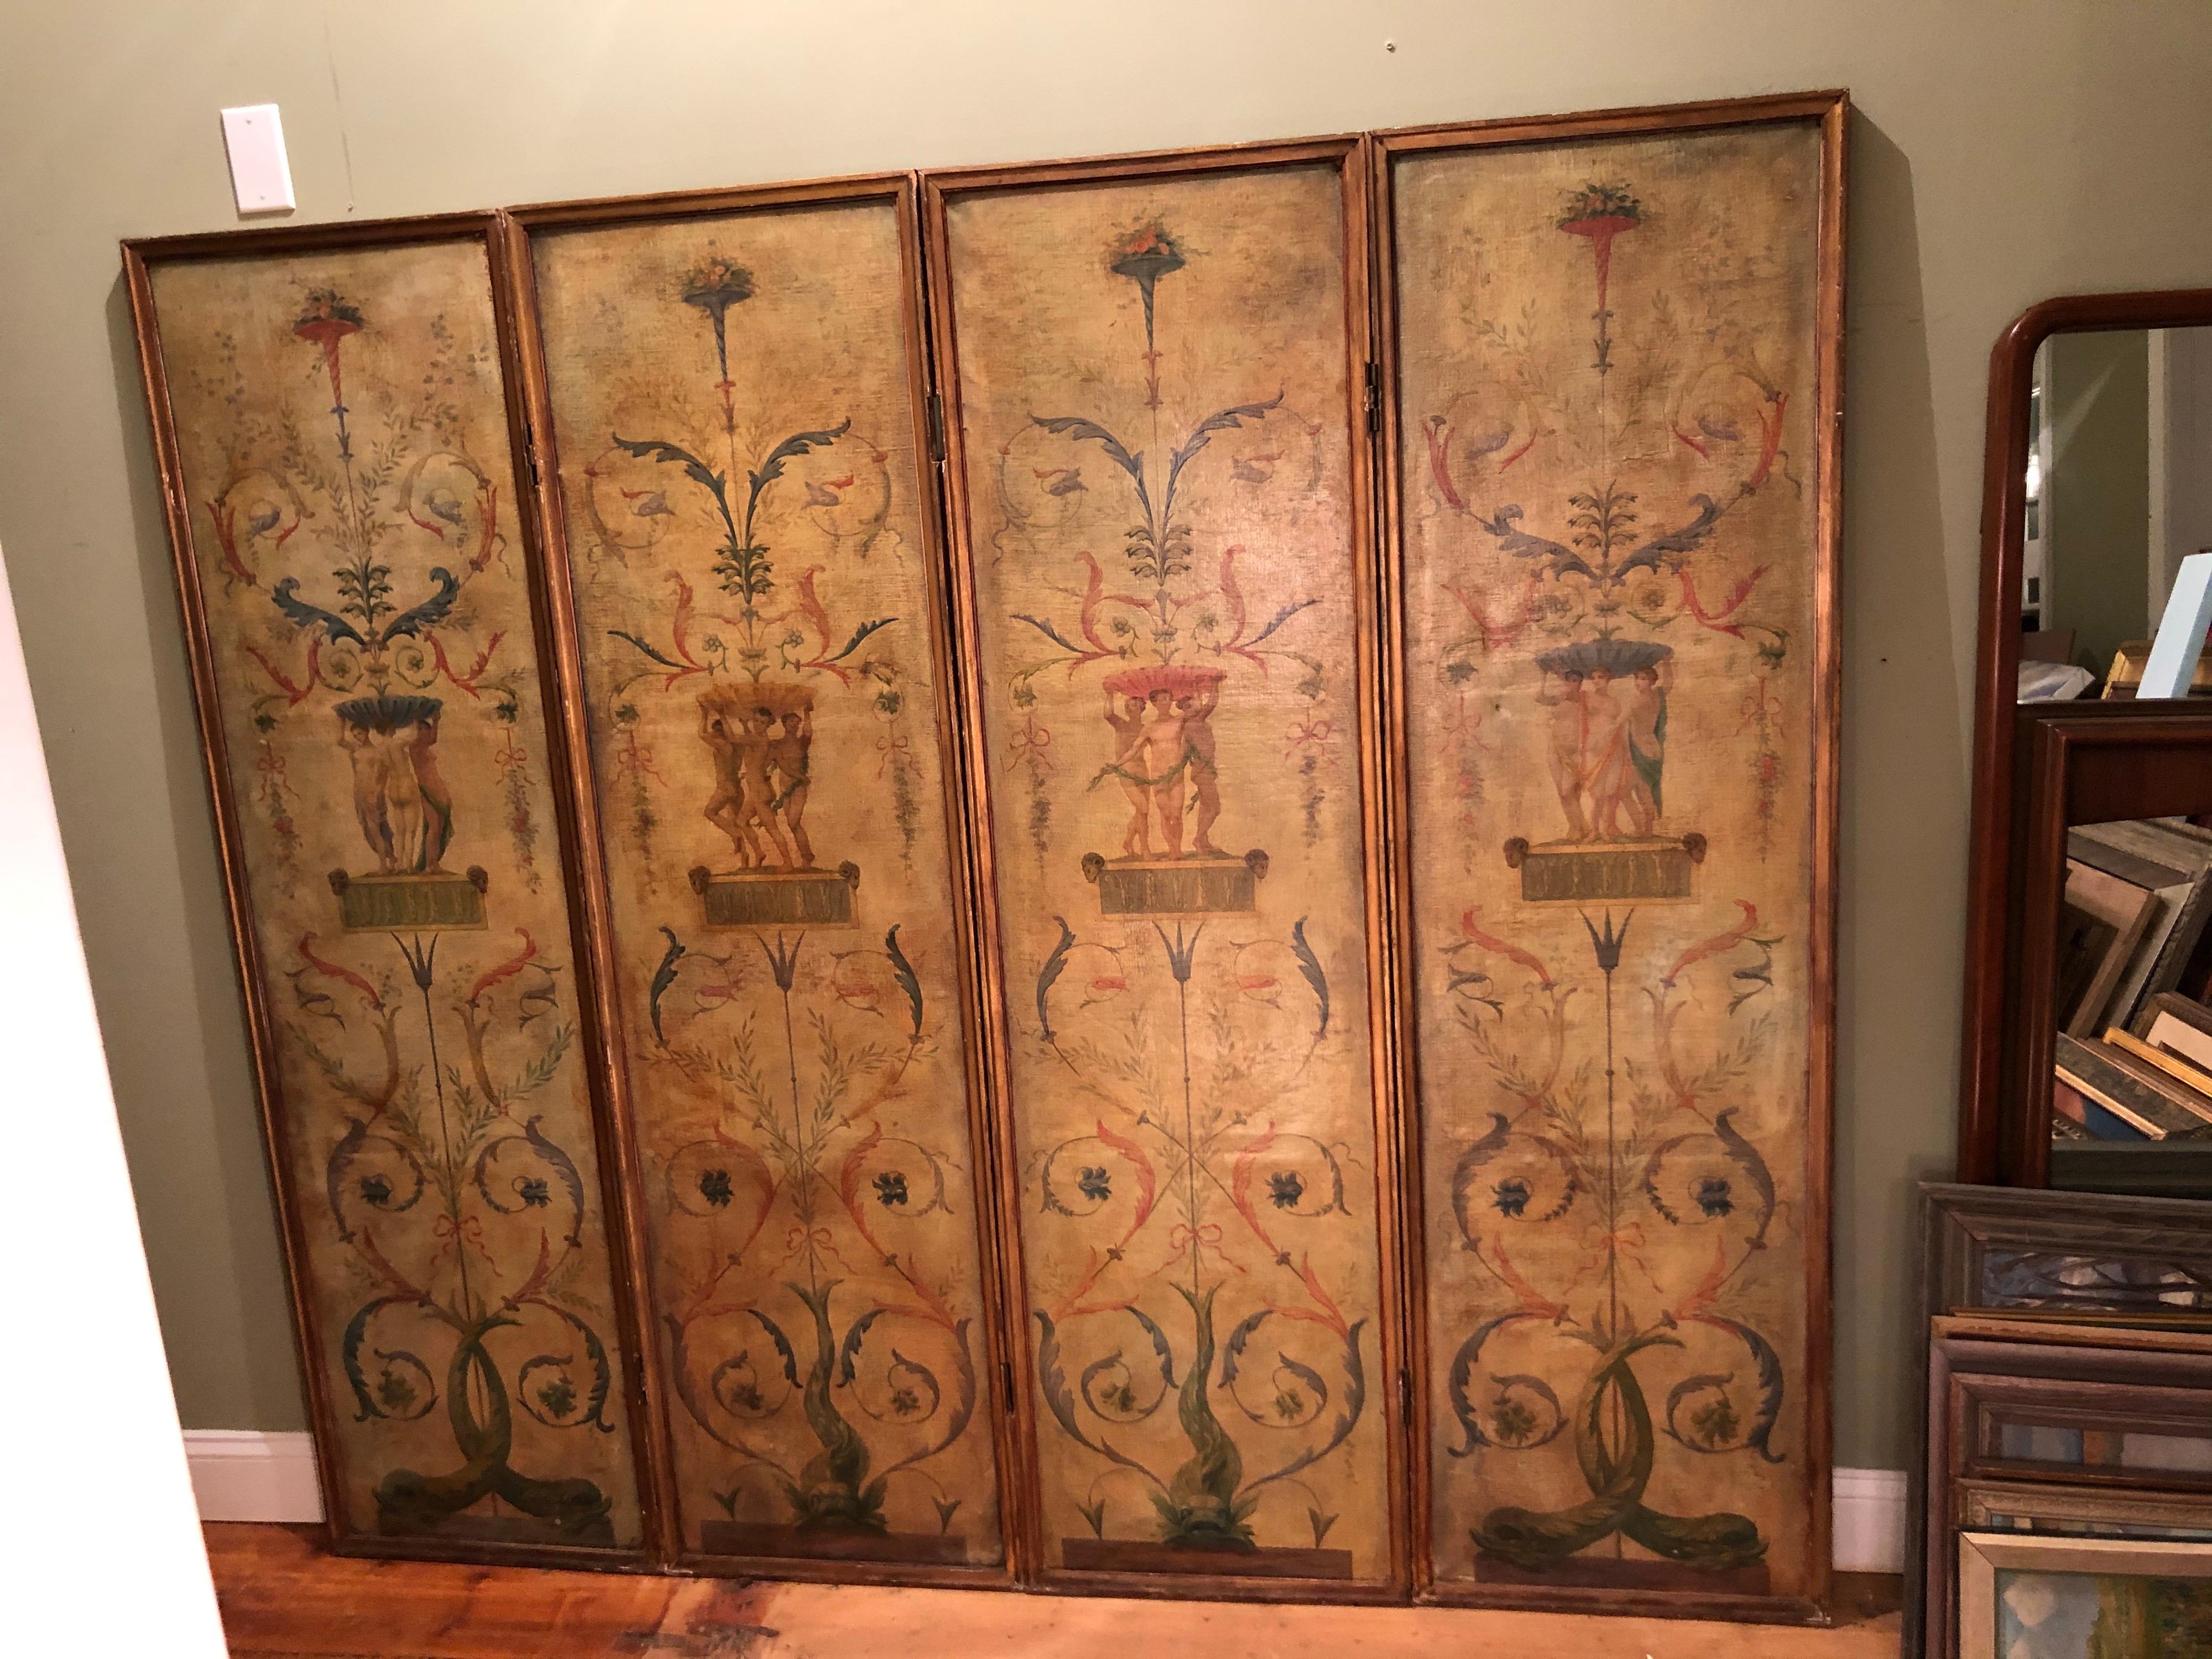 Four-paneled hand painted French Neoclassical screen or Wall Hanging. Beautifully detailed nymphs and fountains with neoclassical motifs. These panels were formally hung in an entrance of a mansion. Currently the four panel piece (76